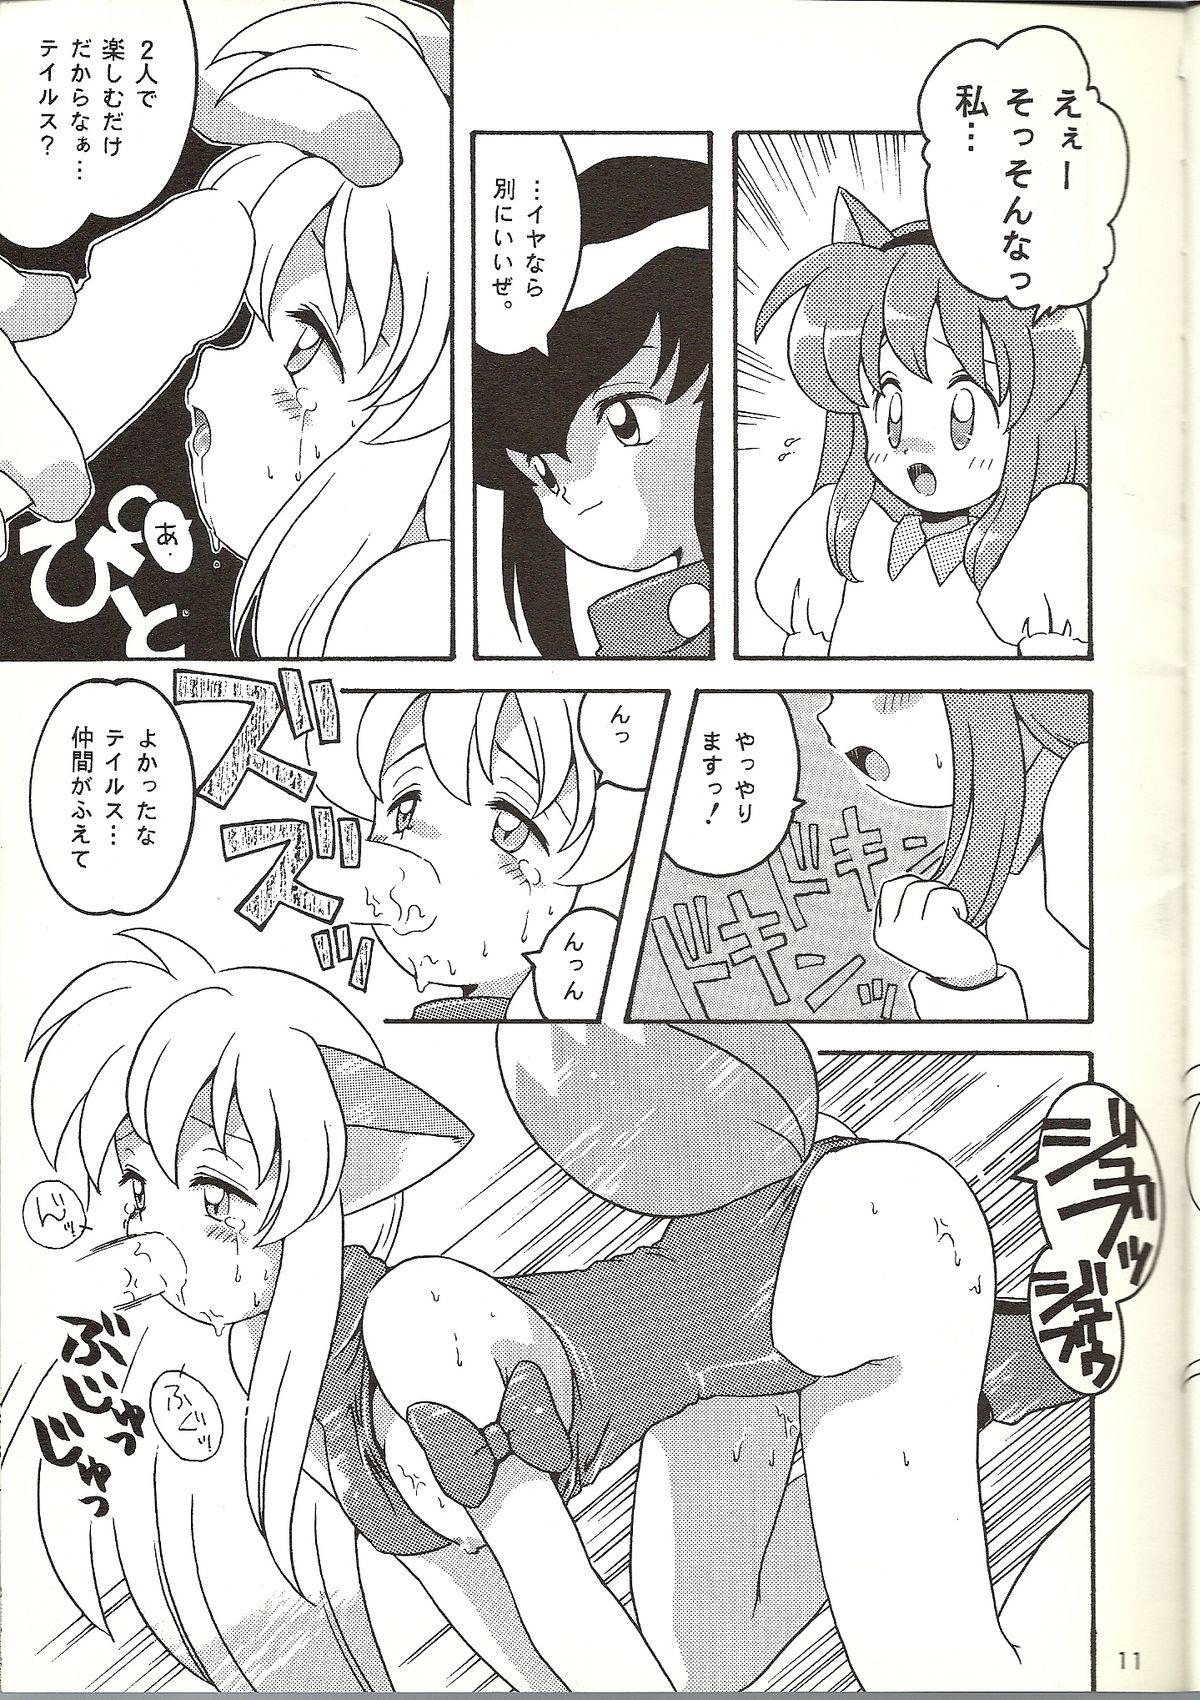 Mulher O - Guardian heroes Sonic the hedgehog Roundass - Page 9